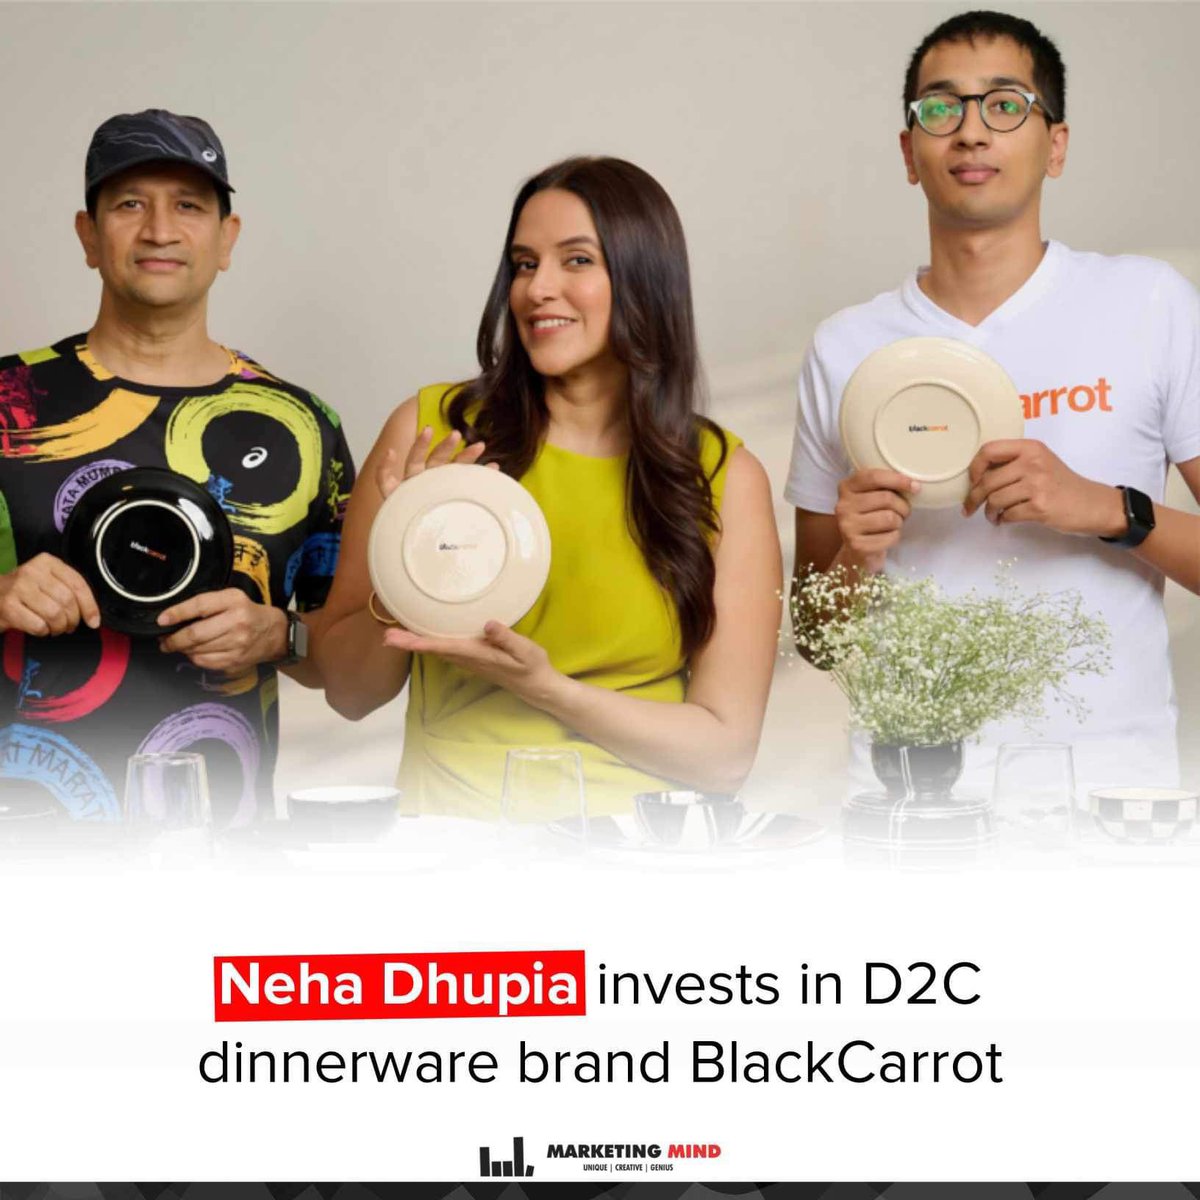 Neha Dhupia has also joined the firm as a brand ambassador as part of the agreement, and she will market the brand. #MarketingMind #NehaDhupia #WhatsBuzzing #BlackCarrot